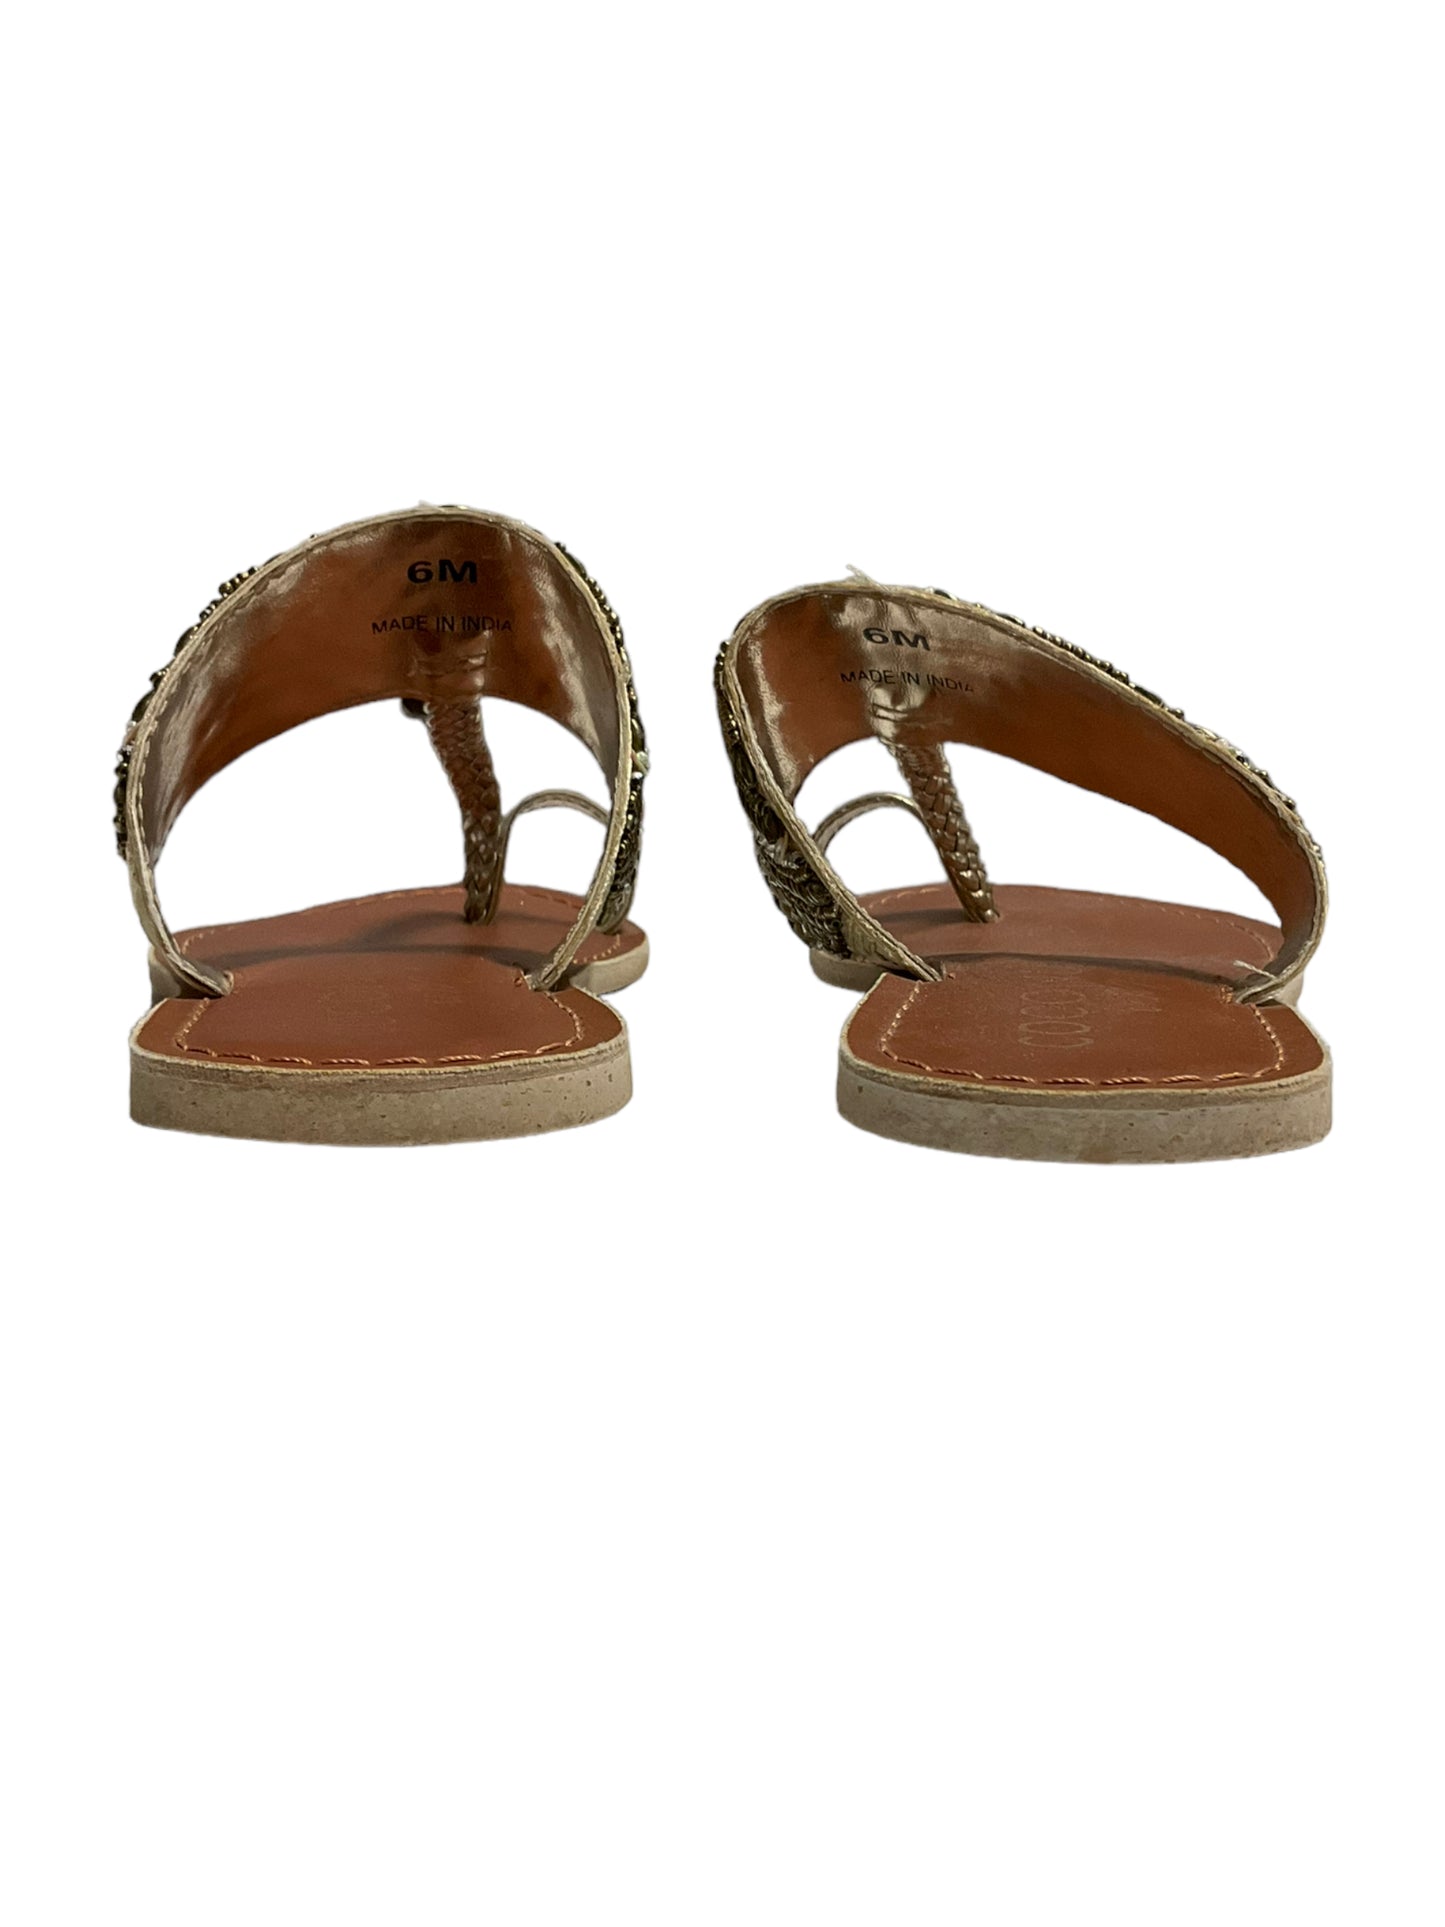 Shoes Flats Espadrille By Marc Fisher  Size: 6.5